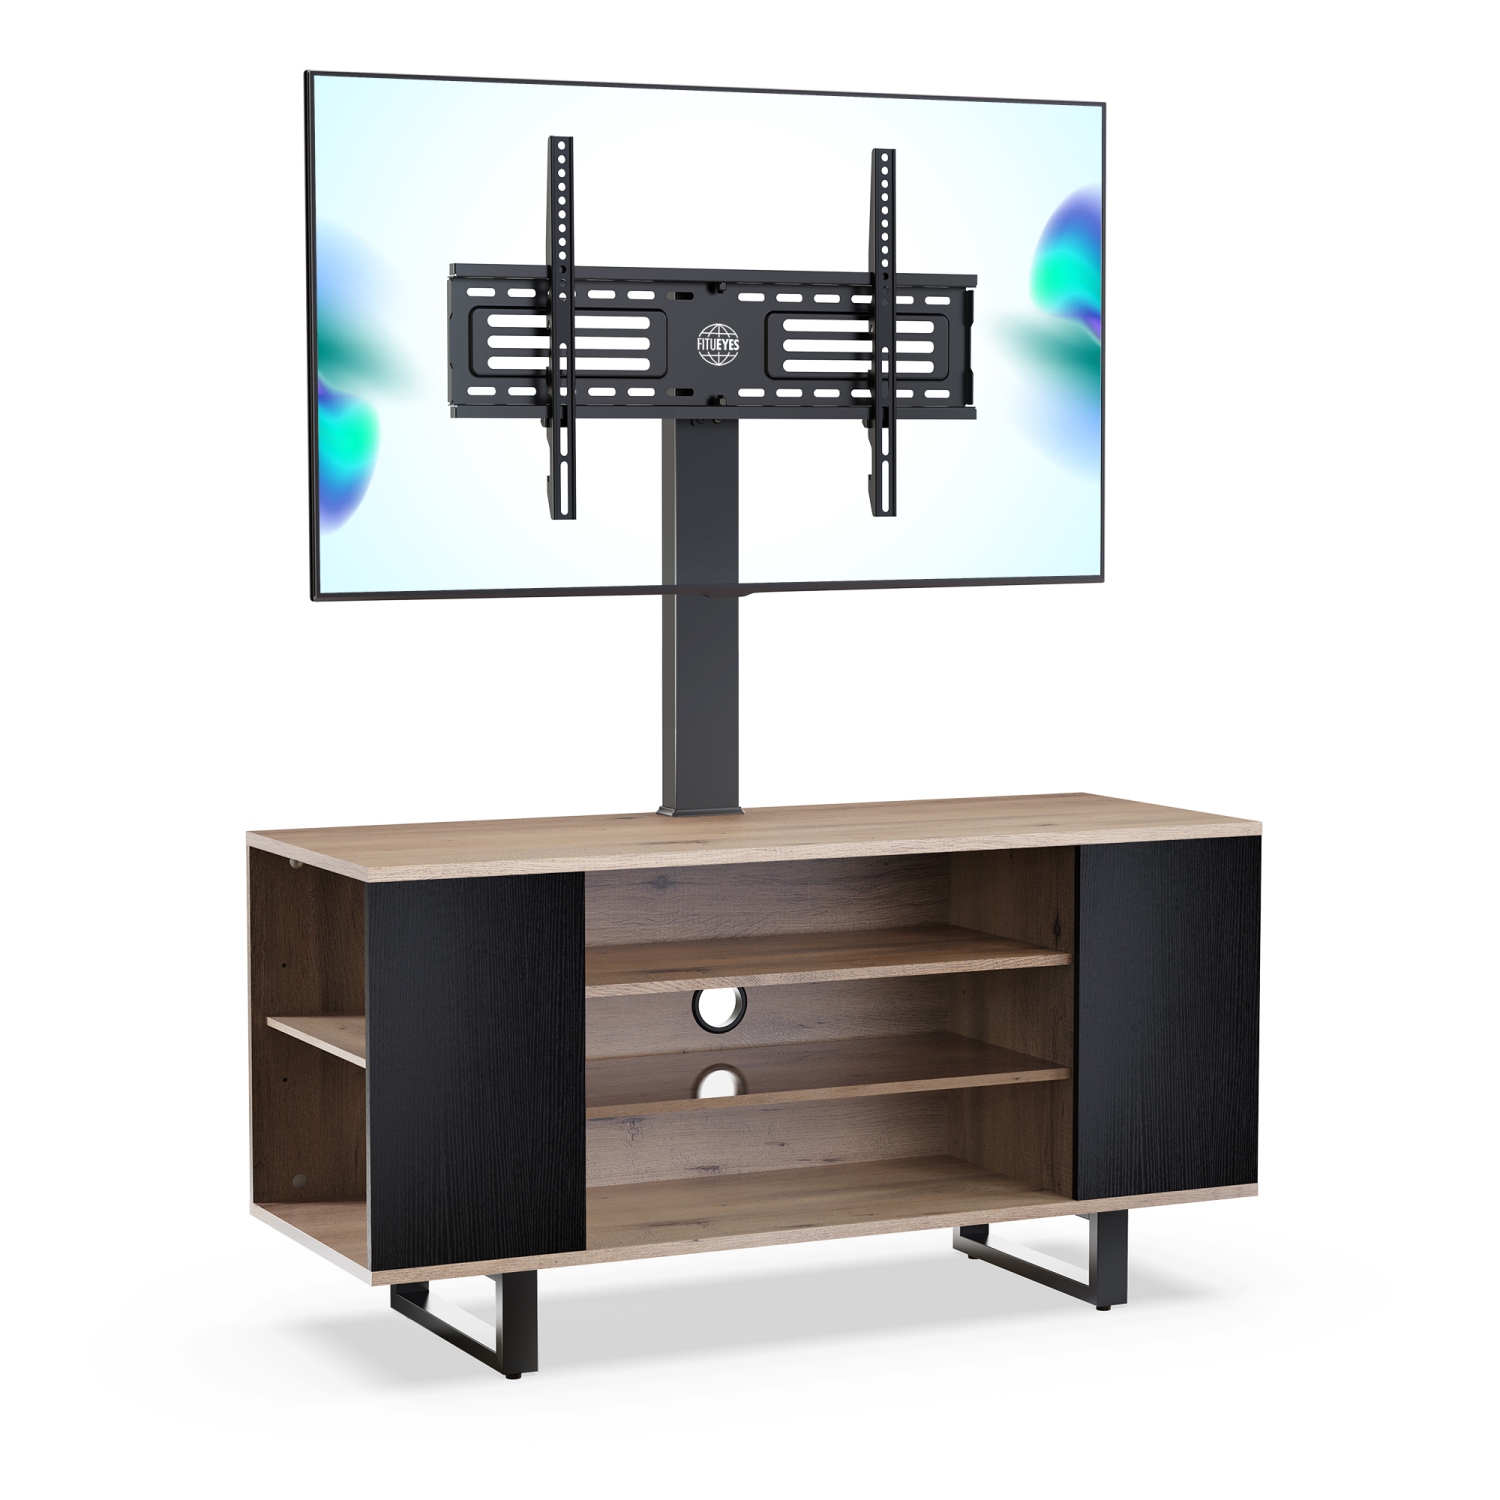 FITUEYES Swivel Corner TV Stand for 32 to 70 inches LED LCD Flat Screen Height Adjustable Media Console Gray